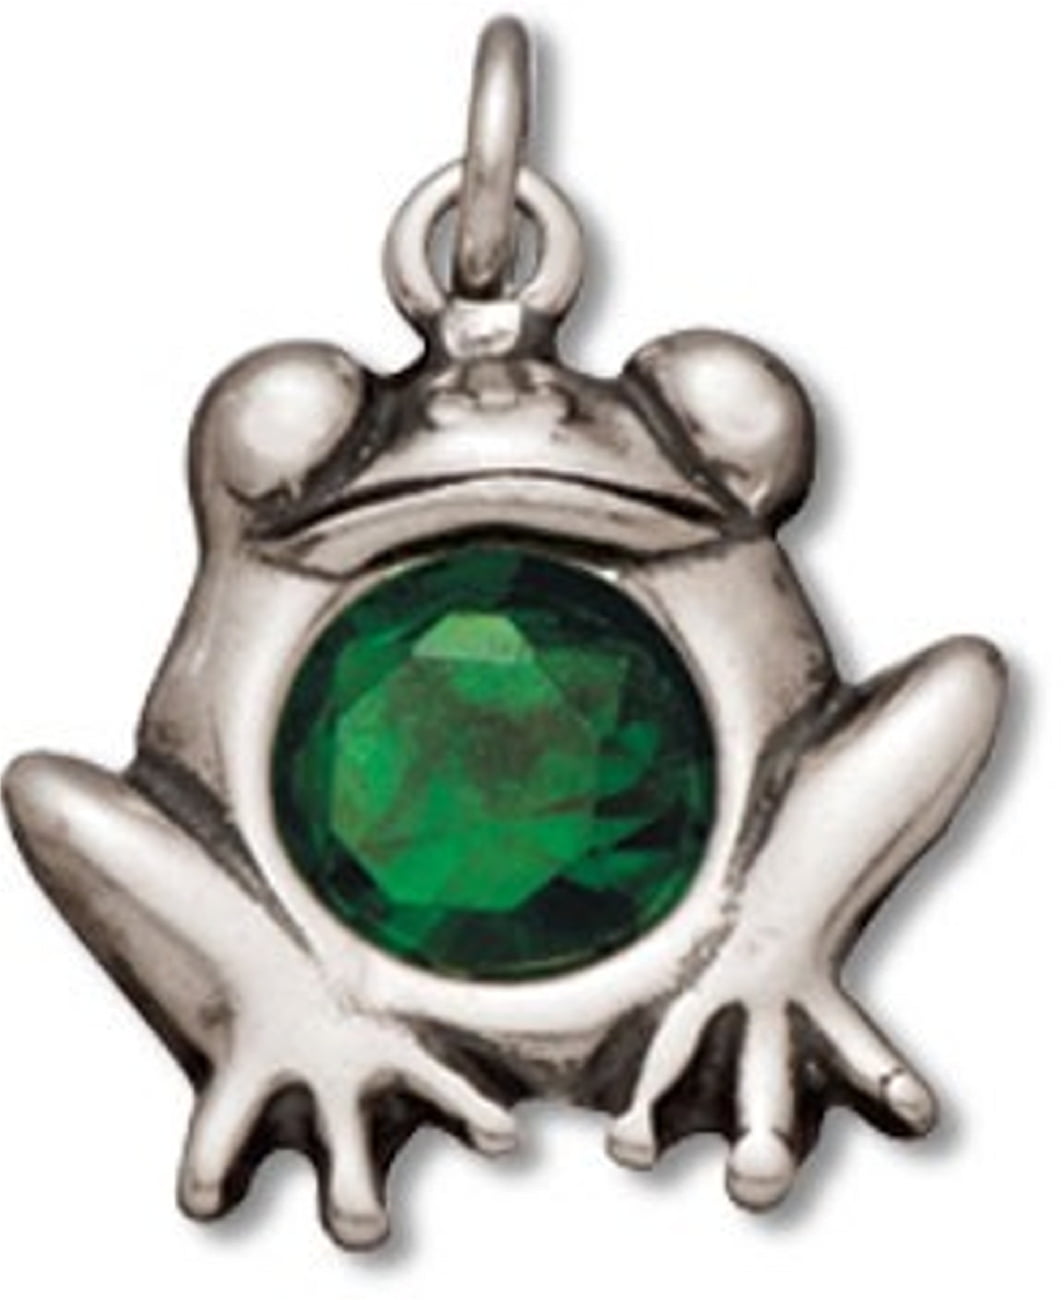 Sterling Silver 7 4.5mm Charm Bracelet With Attached 3D Frog Prince Charm